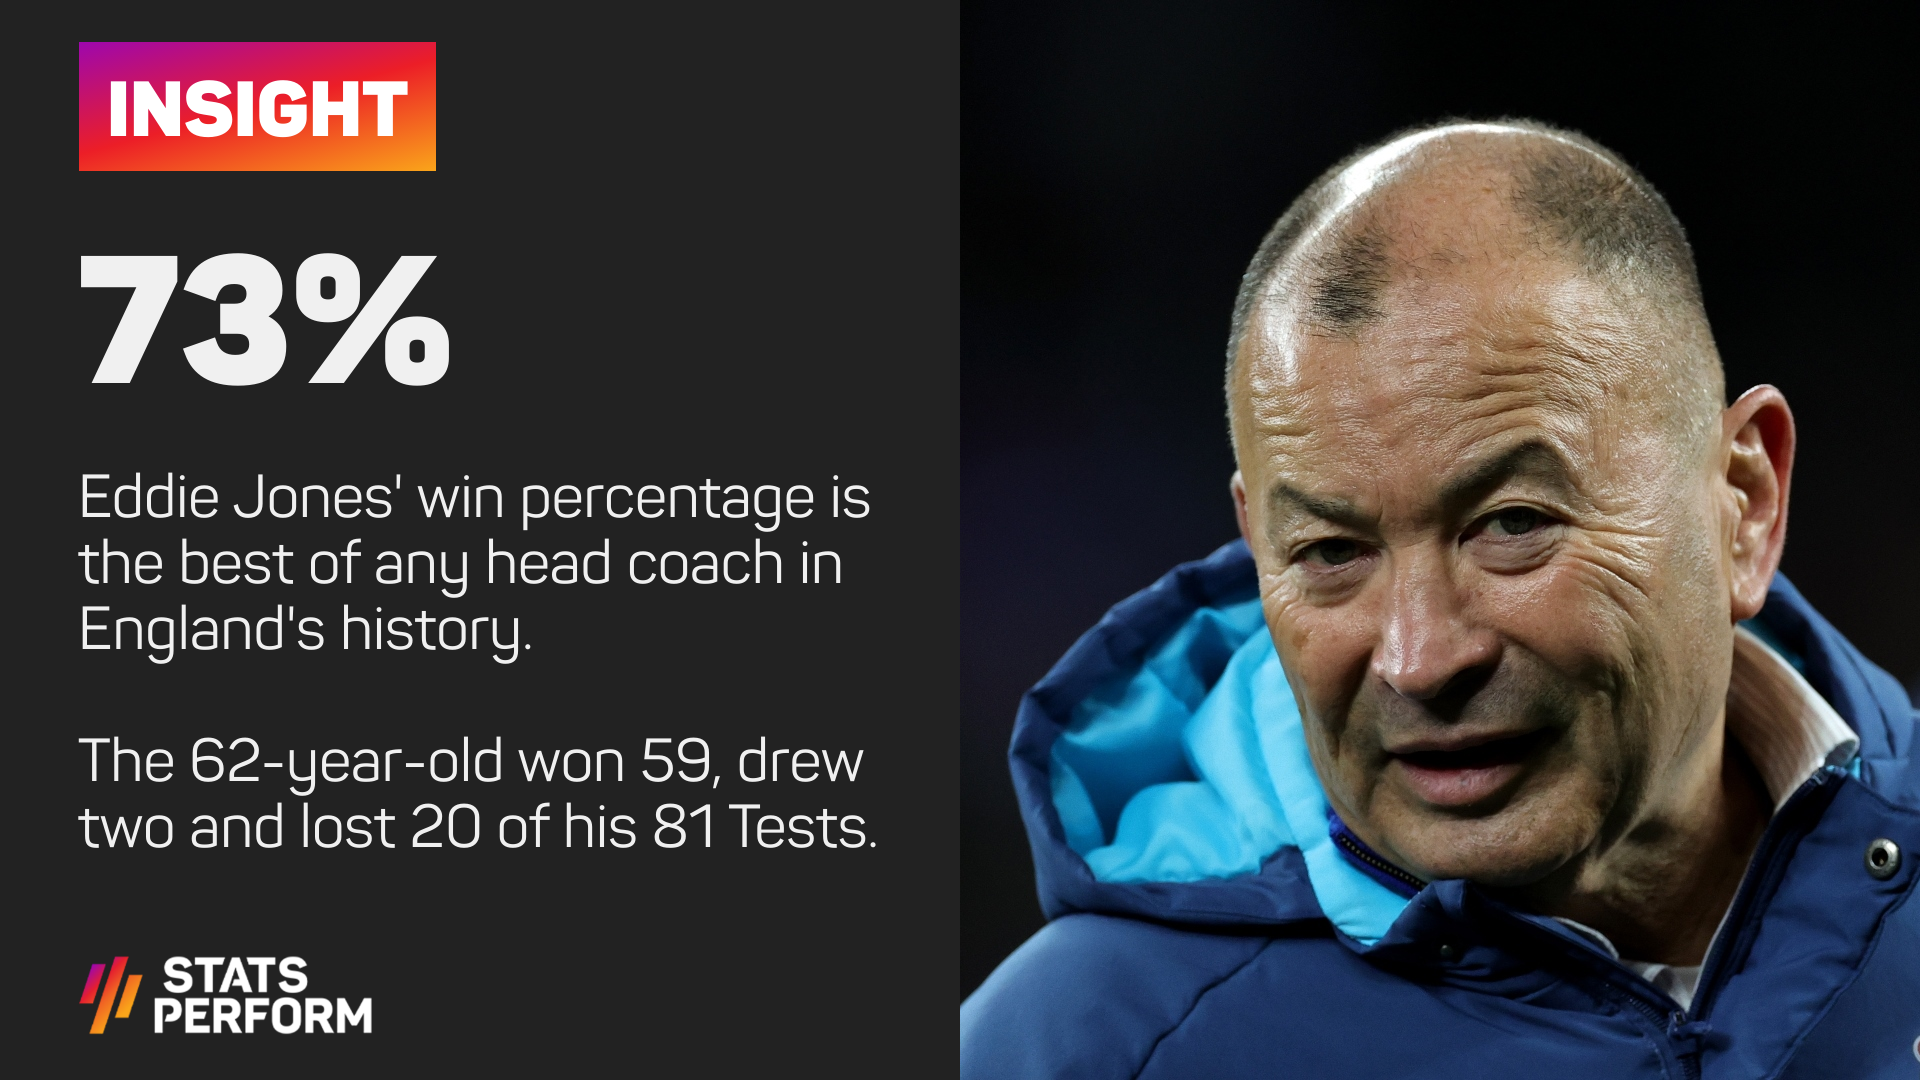 Eddie Jones won 73 per cent of his matches in charge of England